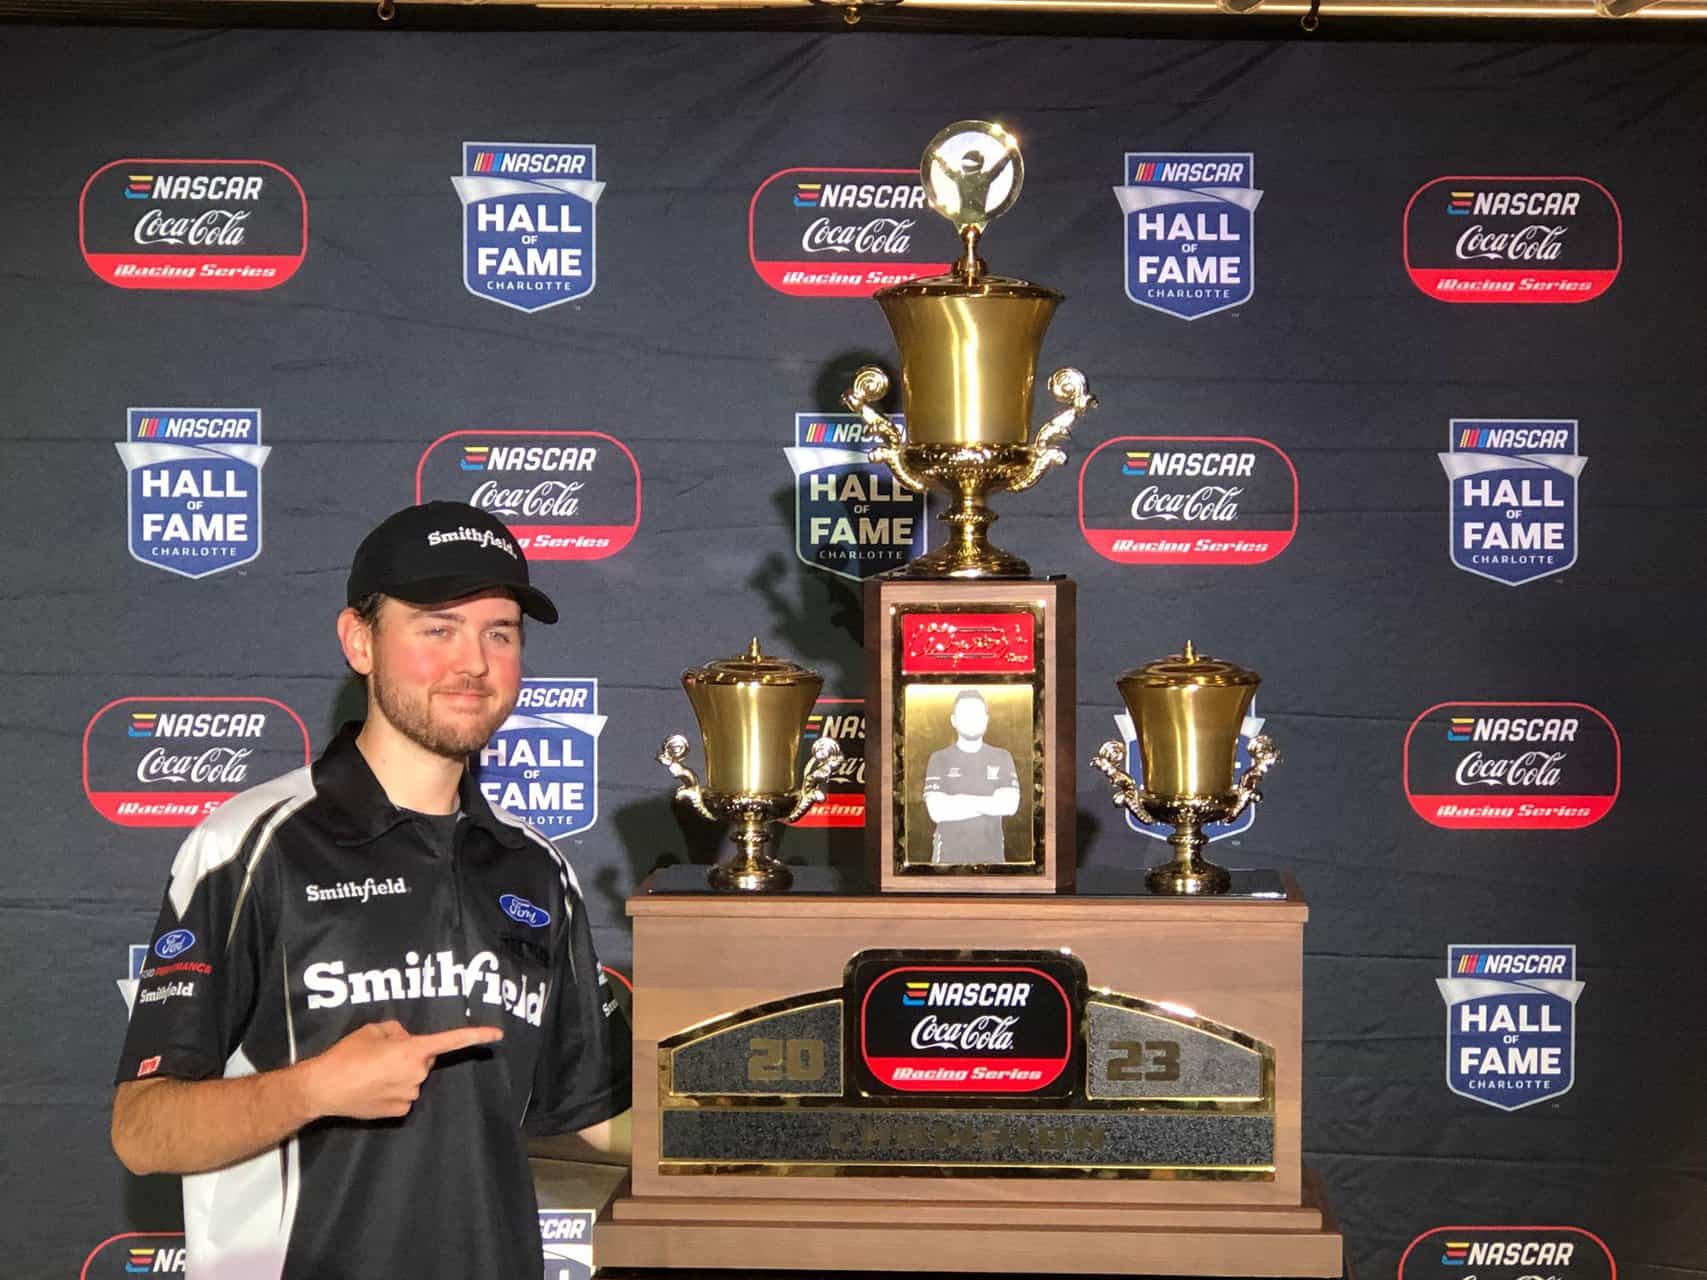 Steven Wilson captured the eNASCAR Coca-Cola iRacing Series championship at the NASCAR Hall of Fame.